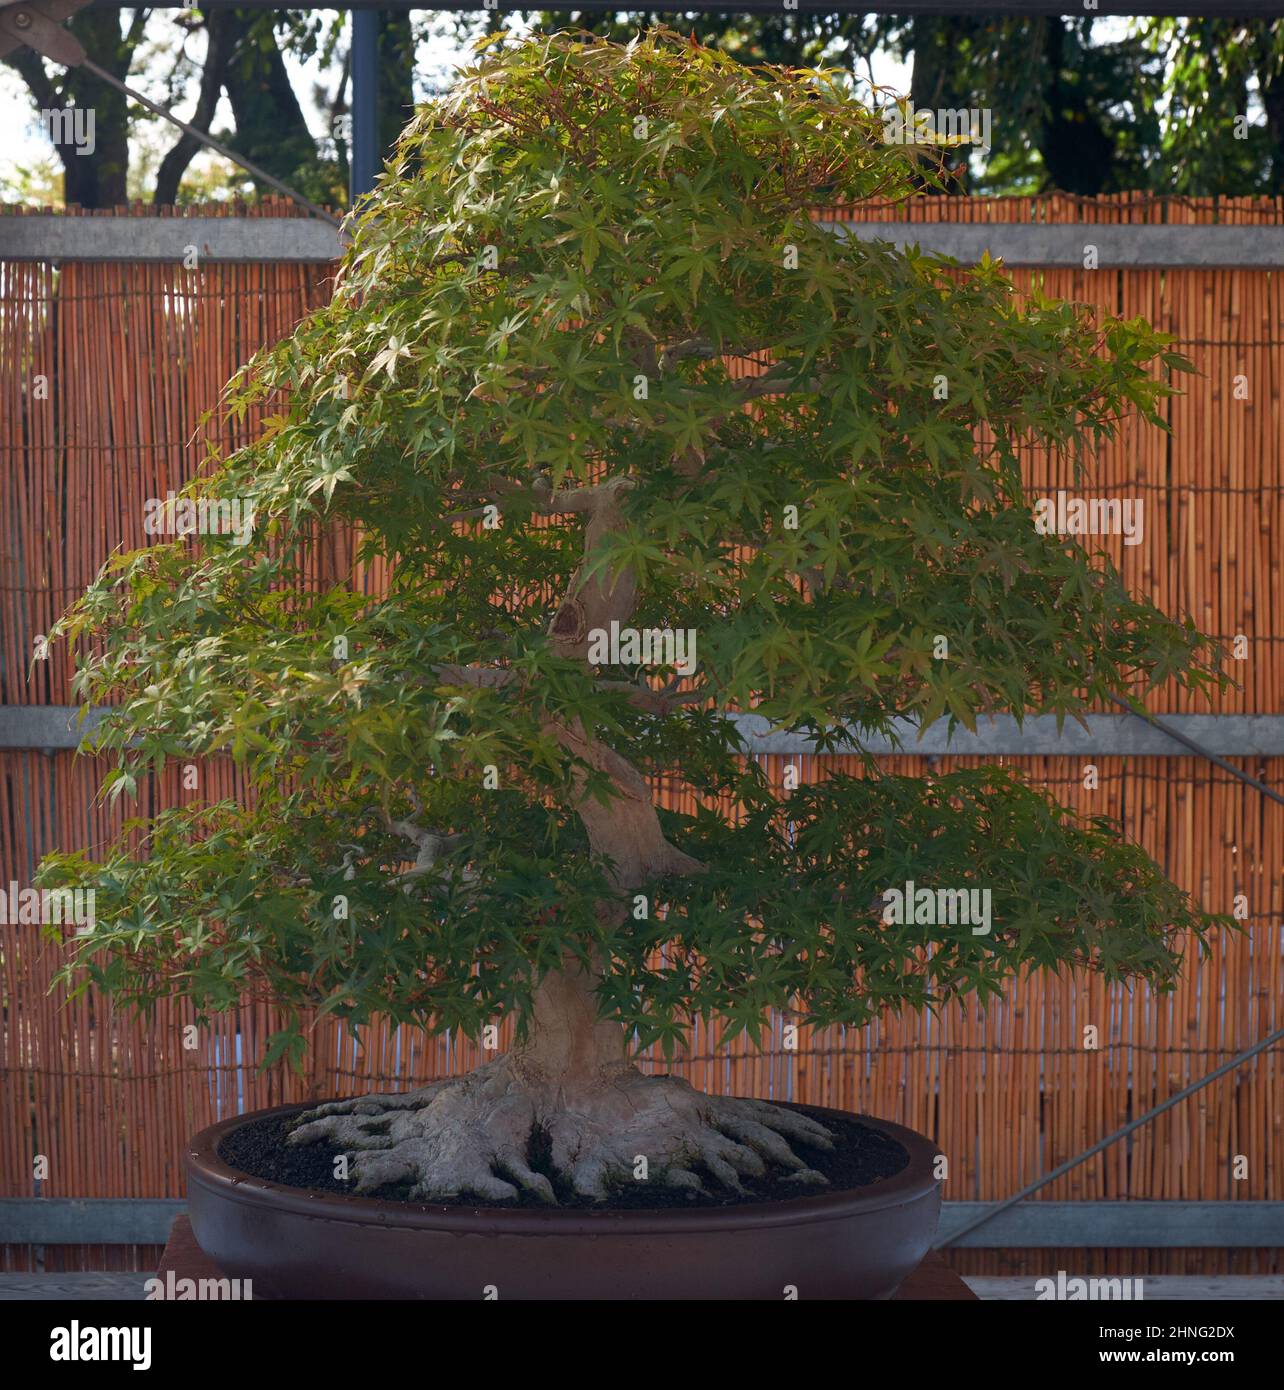 Nagoya, Japan - October 20, 2019: The view of the small decorative bonsai tree of Japanese maple (Acer palmatum ) with great root spread at the annual Stock Photo